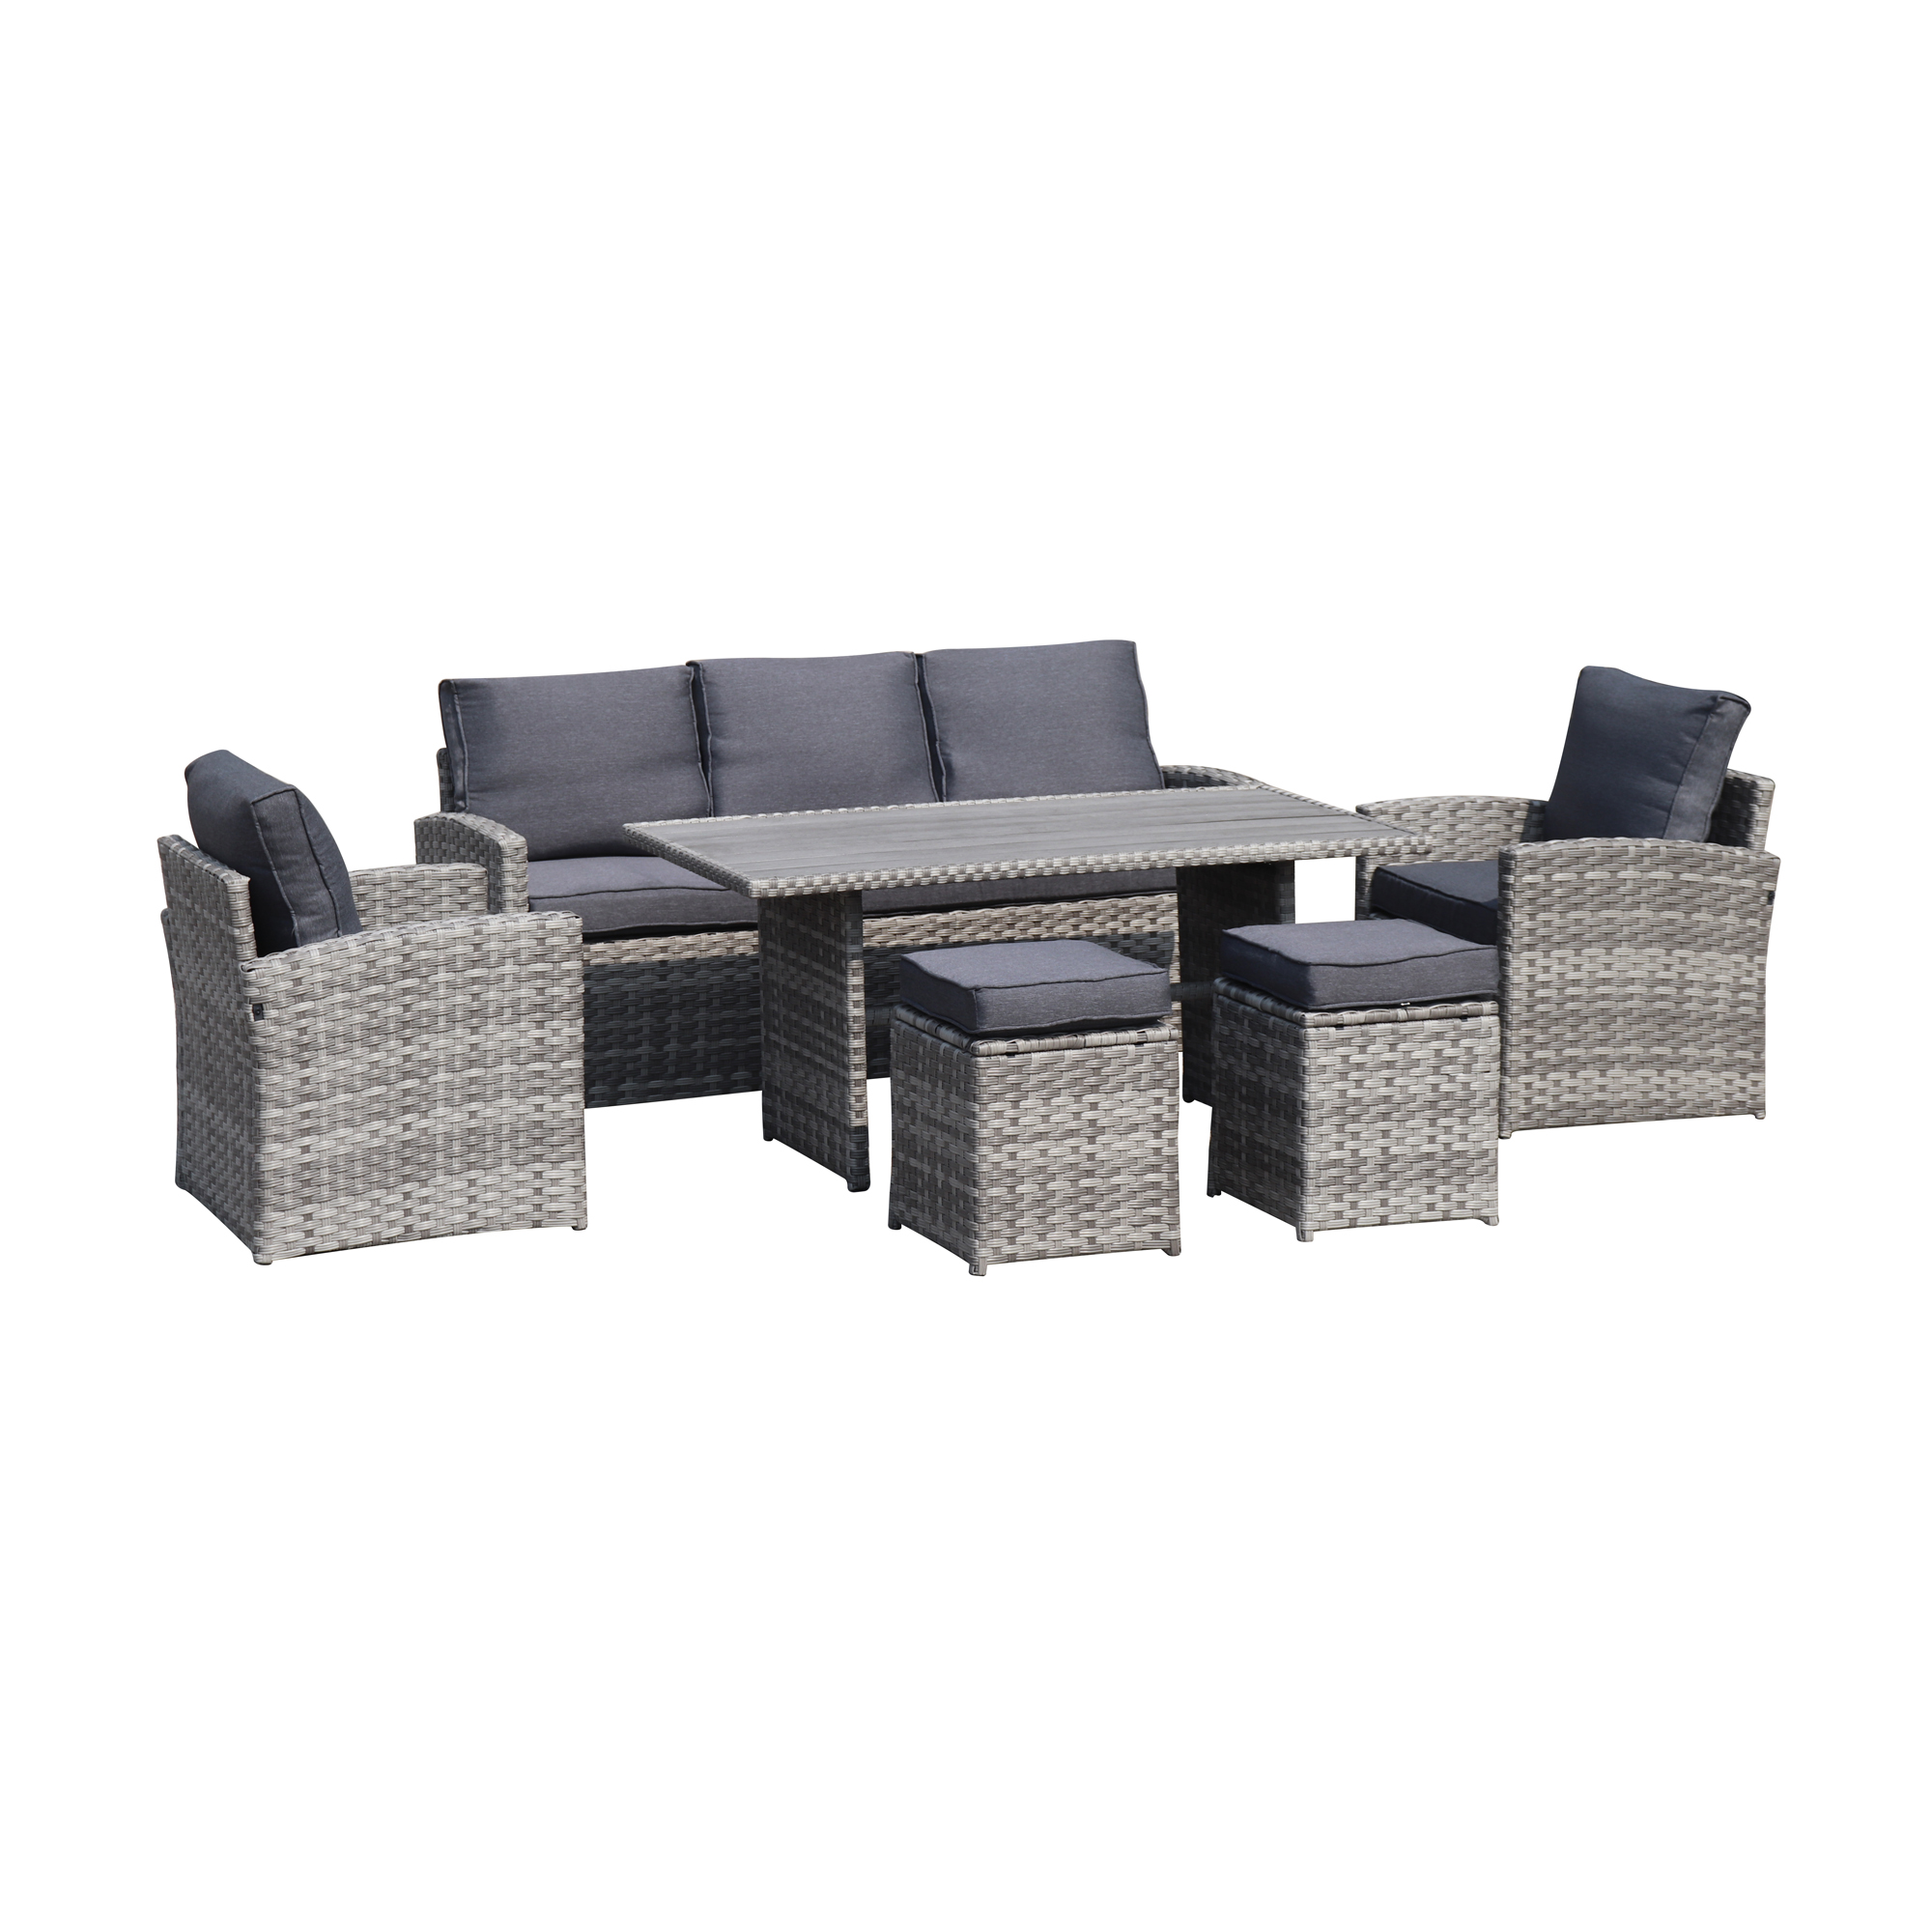 Patio Wicker Sofa Sets, 6 Piece Sectional Furniture Set with Dining Table, All Weather Rattan Furniture Set, Outdoor Conversation Chairs Set with Cushions, for Poolside, Backyard, Deck, D8177 - image 2 of 12